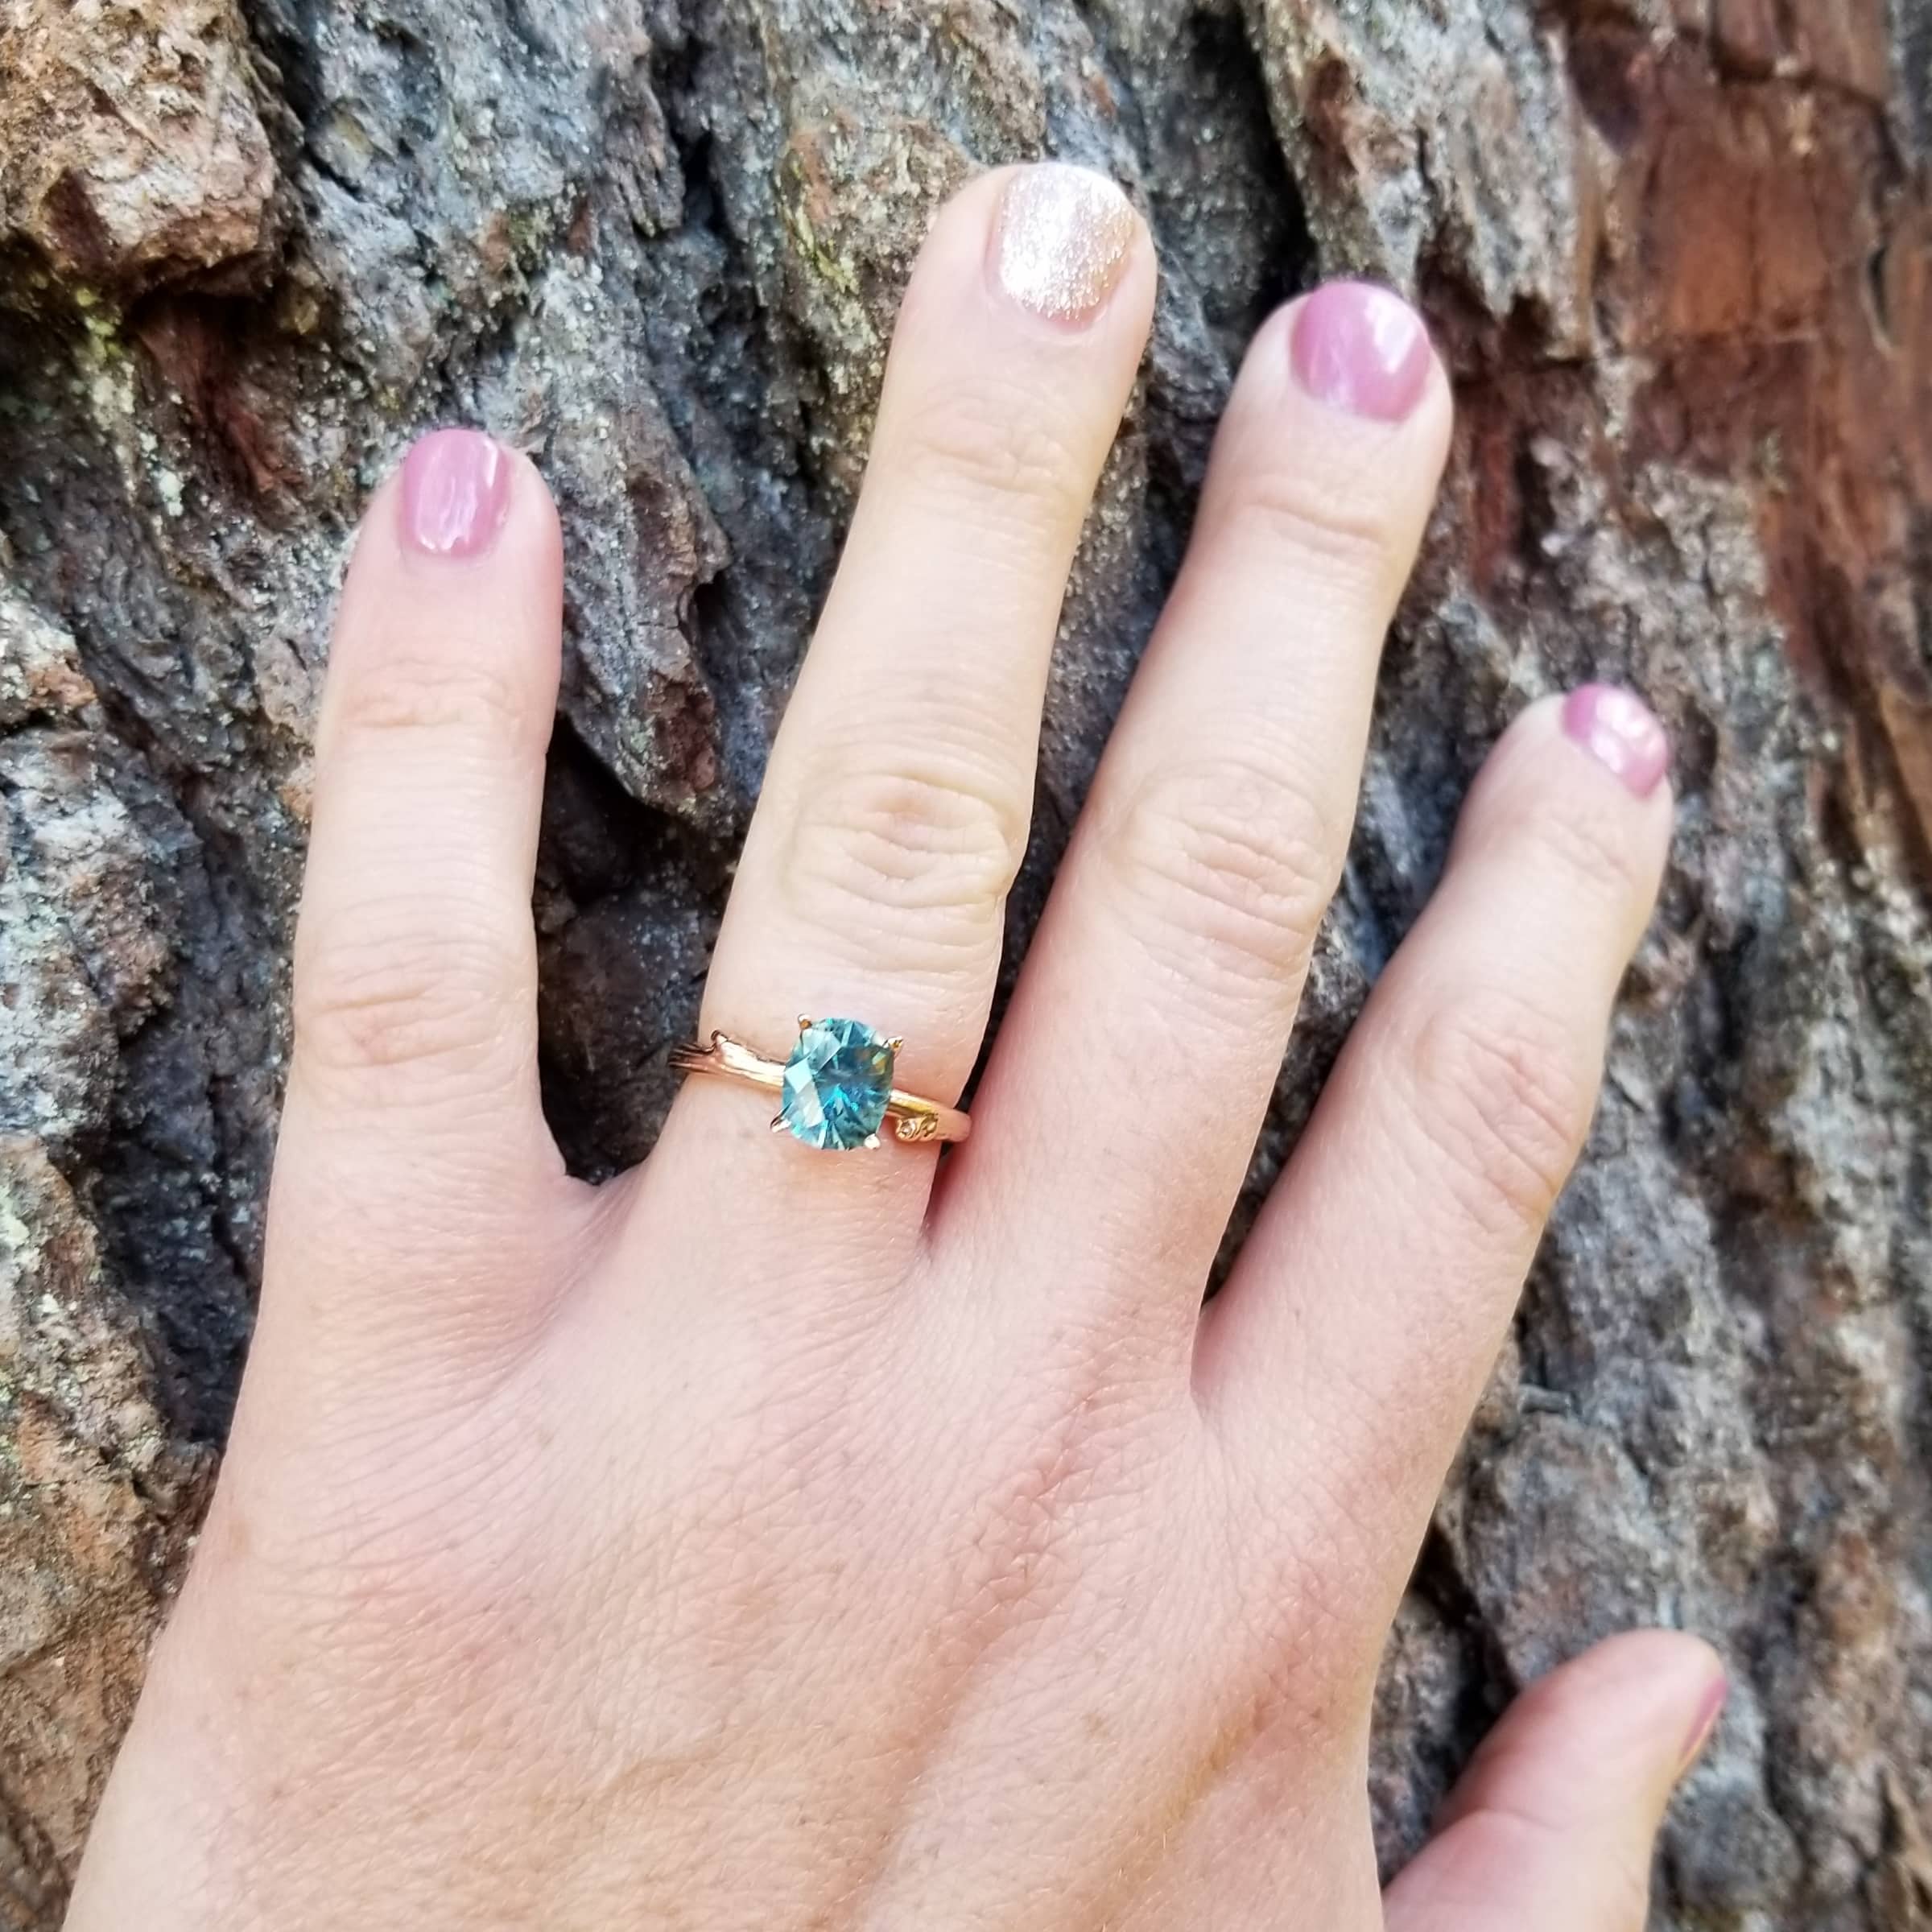 A photo from a customer review featuring a "Twyg" ring in 14k rose gold with a 2.16-carat Montana sapphire